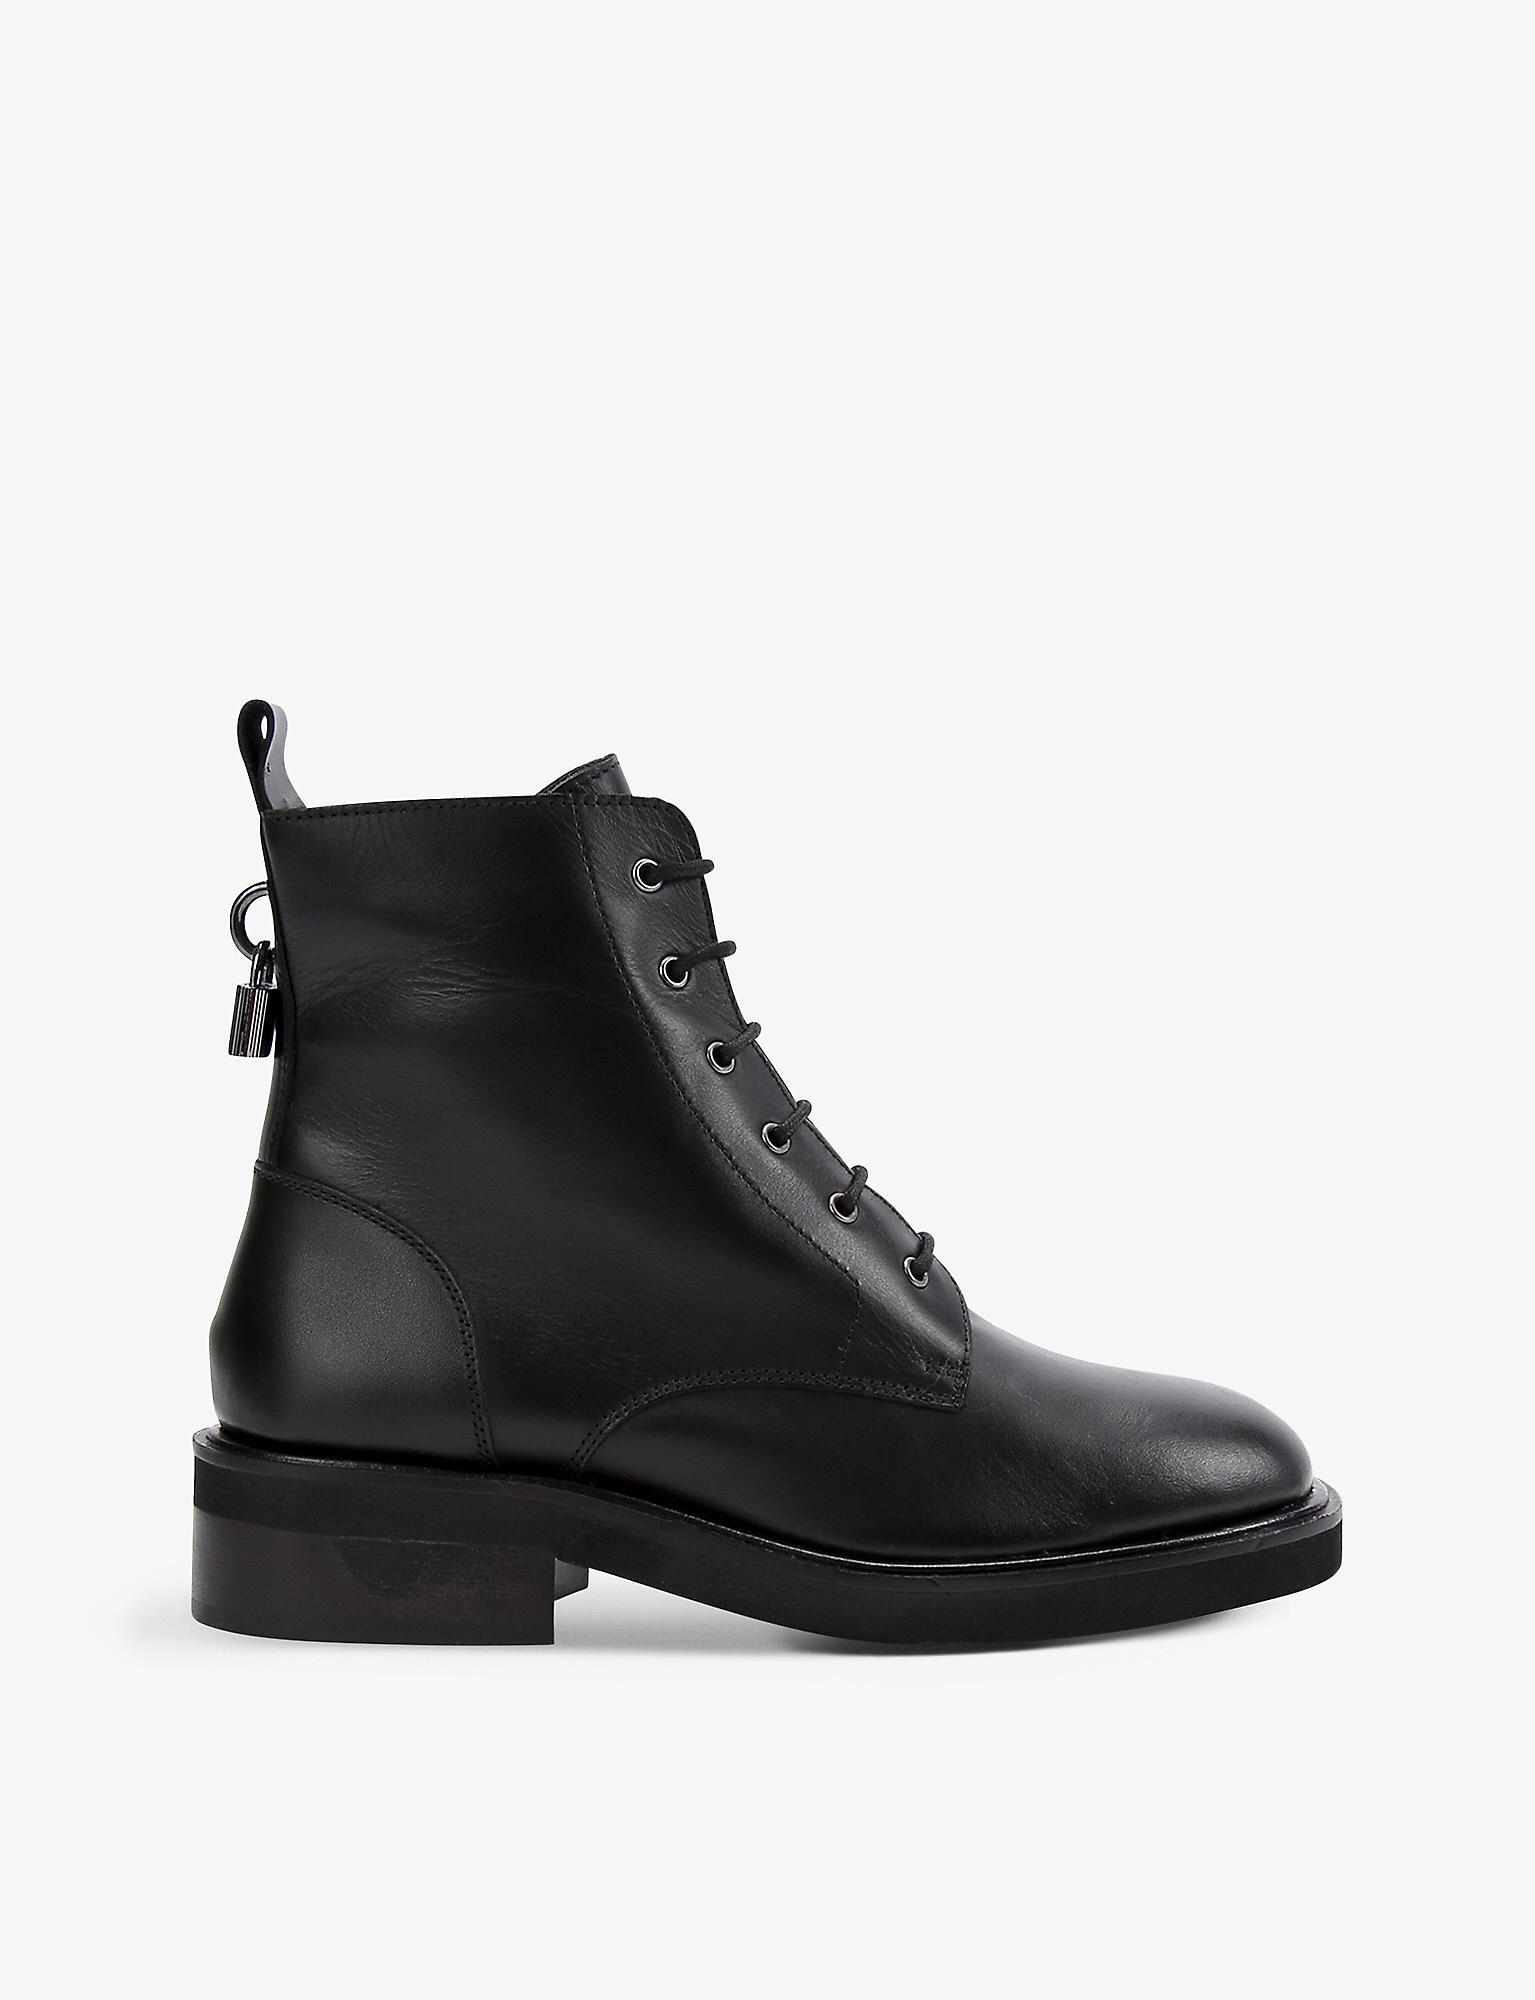 Carvela Kurt Geiger Lock Lace-up Leather Ankle Boots in Black | Lyst